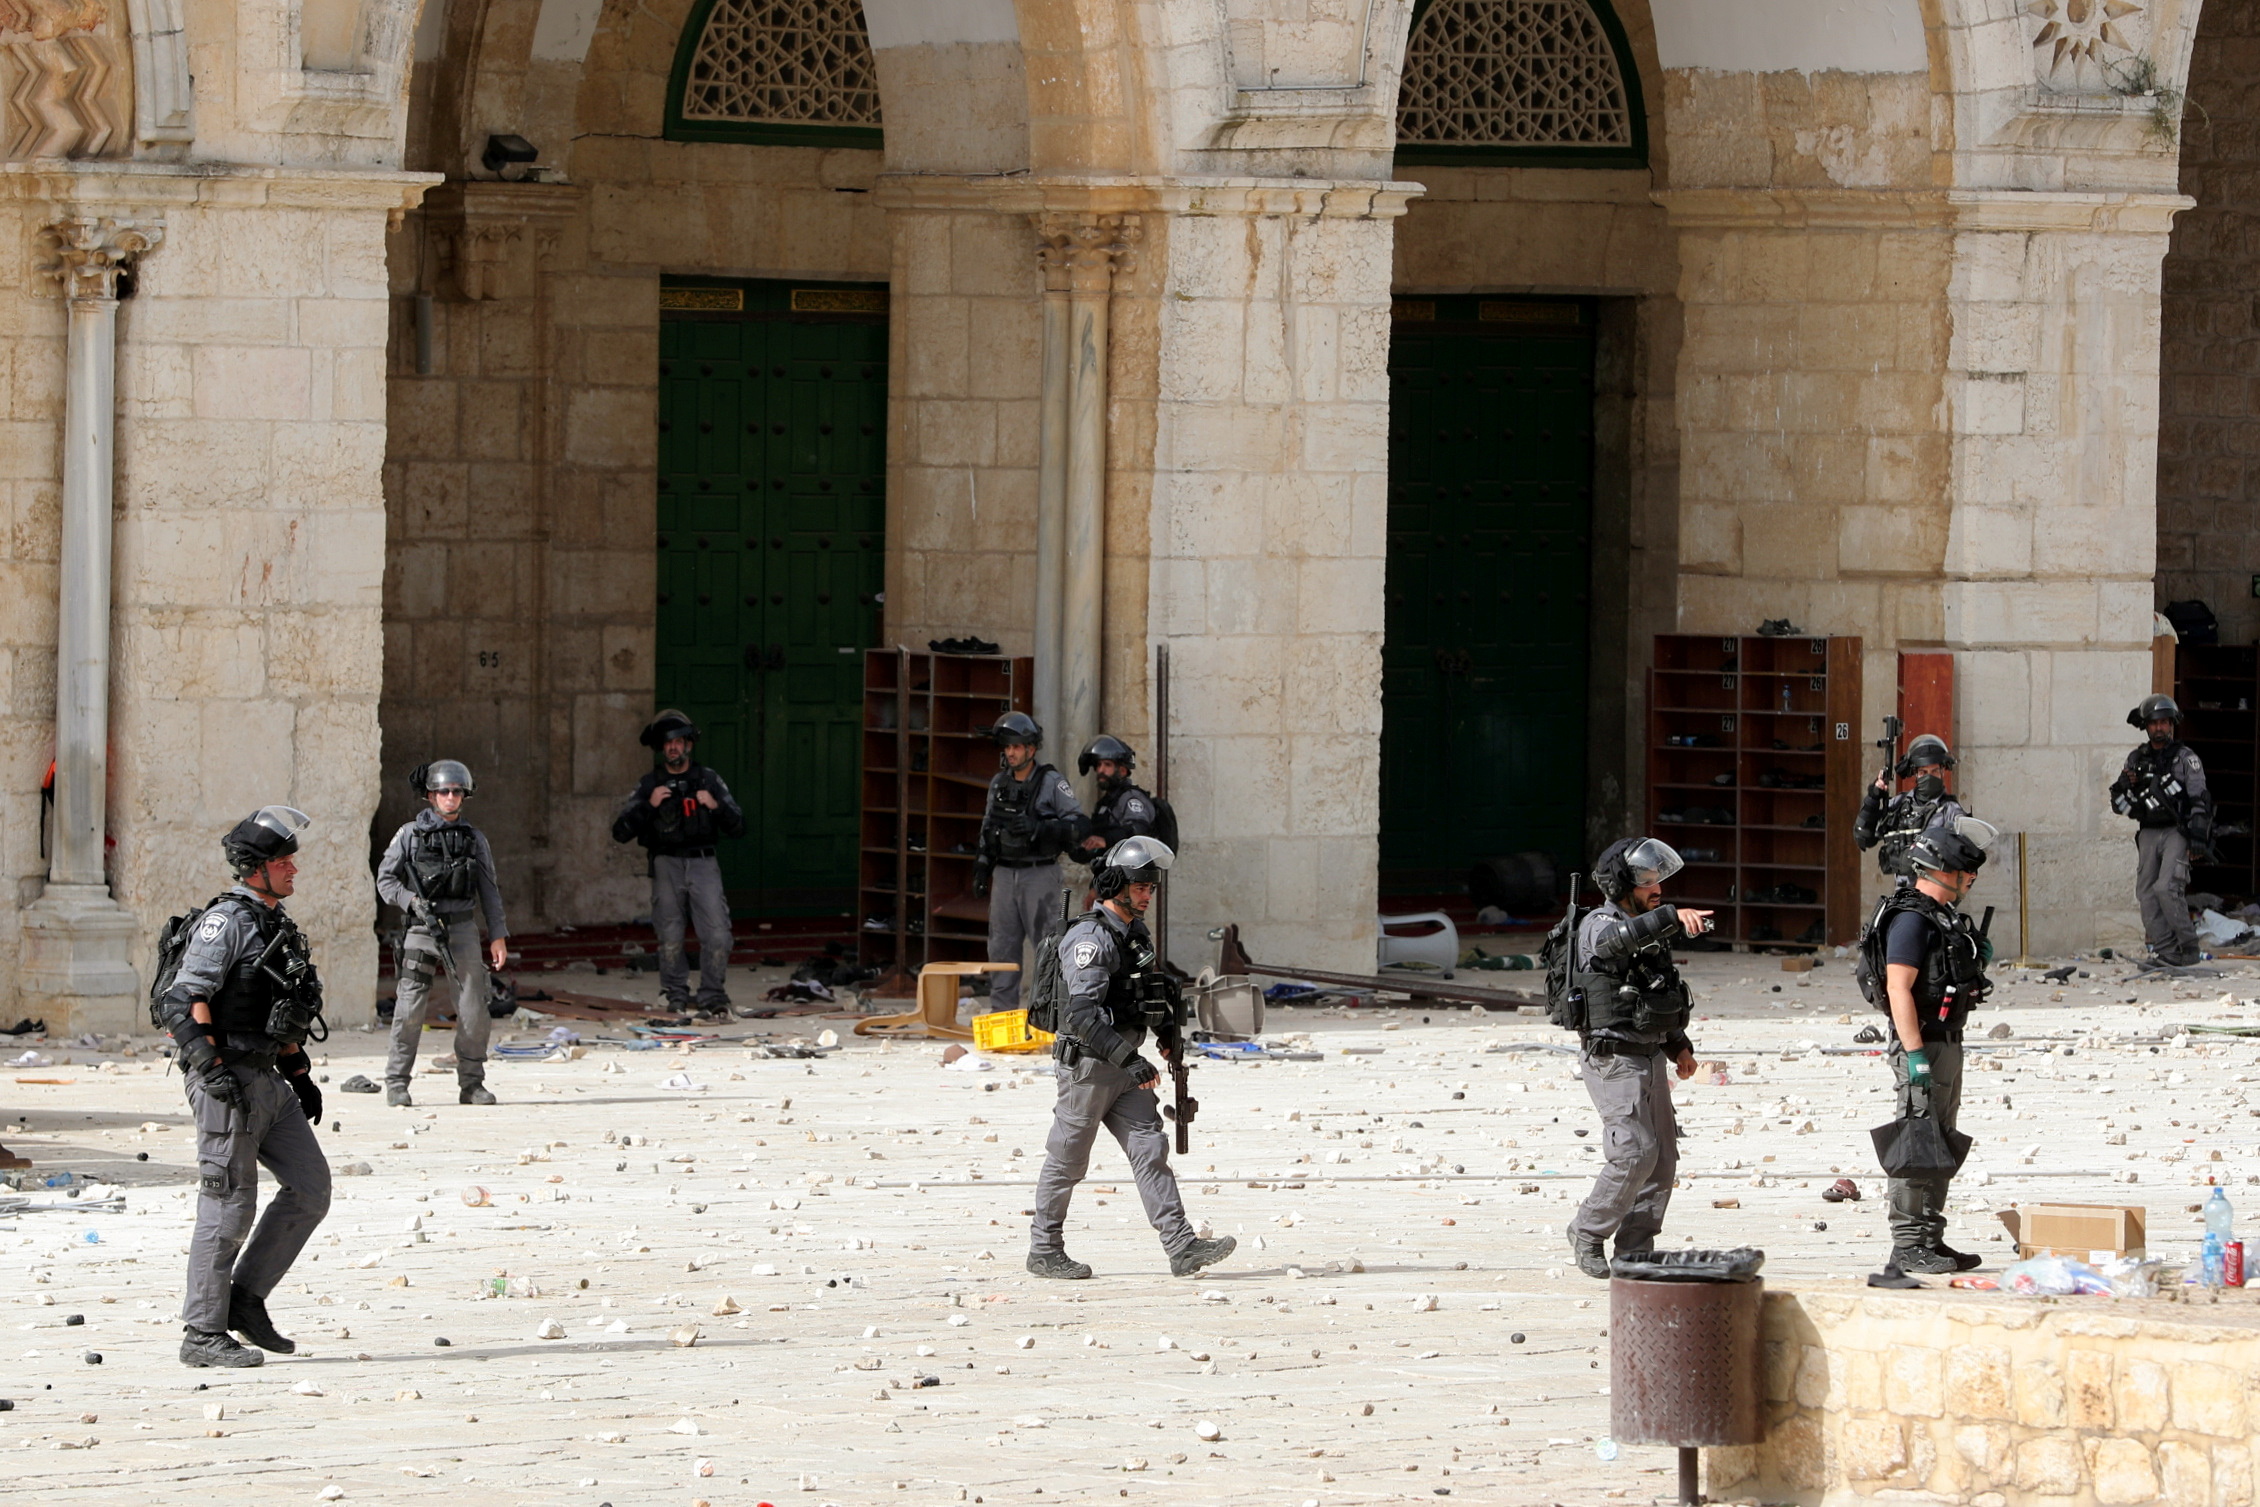 Israeli police gather as they clash with Palestinians at the compound that houses Al-Aqsa Mosque, known to Muslims as Noble Sanctuary and to Jews as Temple Mount, in Jerusalem's Old City, May 10, 2021. REUTERS/Ammar Awad